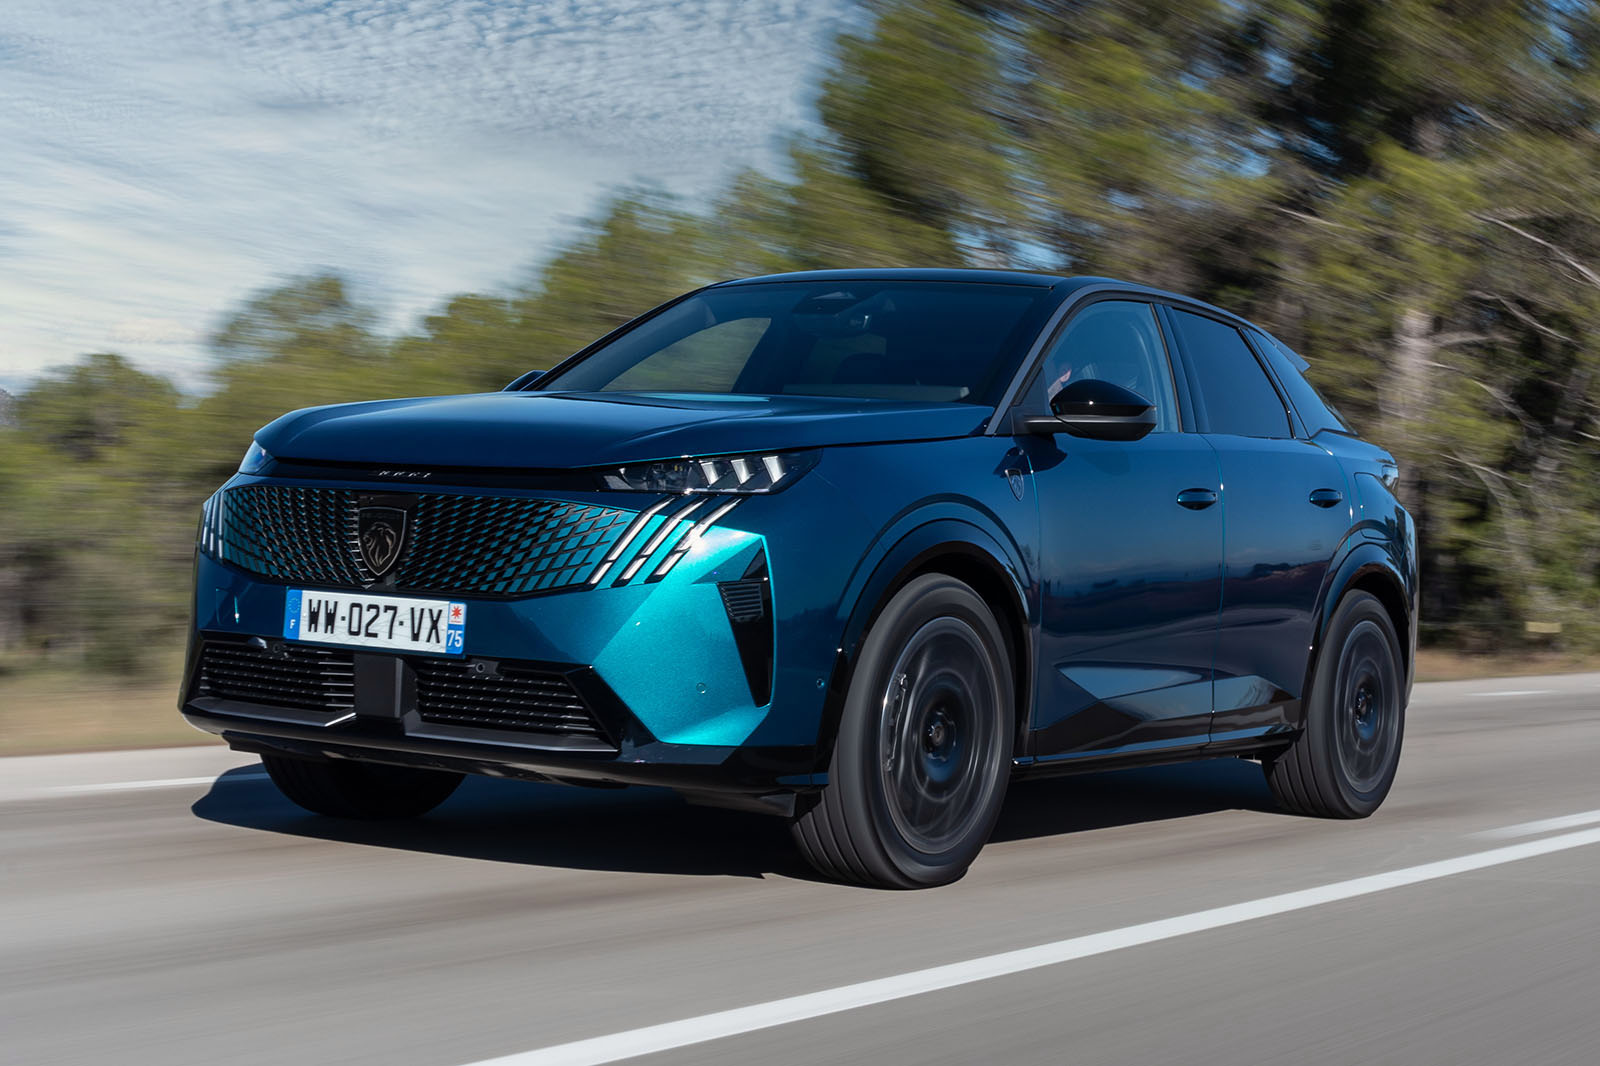 Peugeot 3008 review: dash of style keeps this family SUV near the top of  the pack